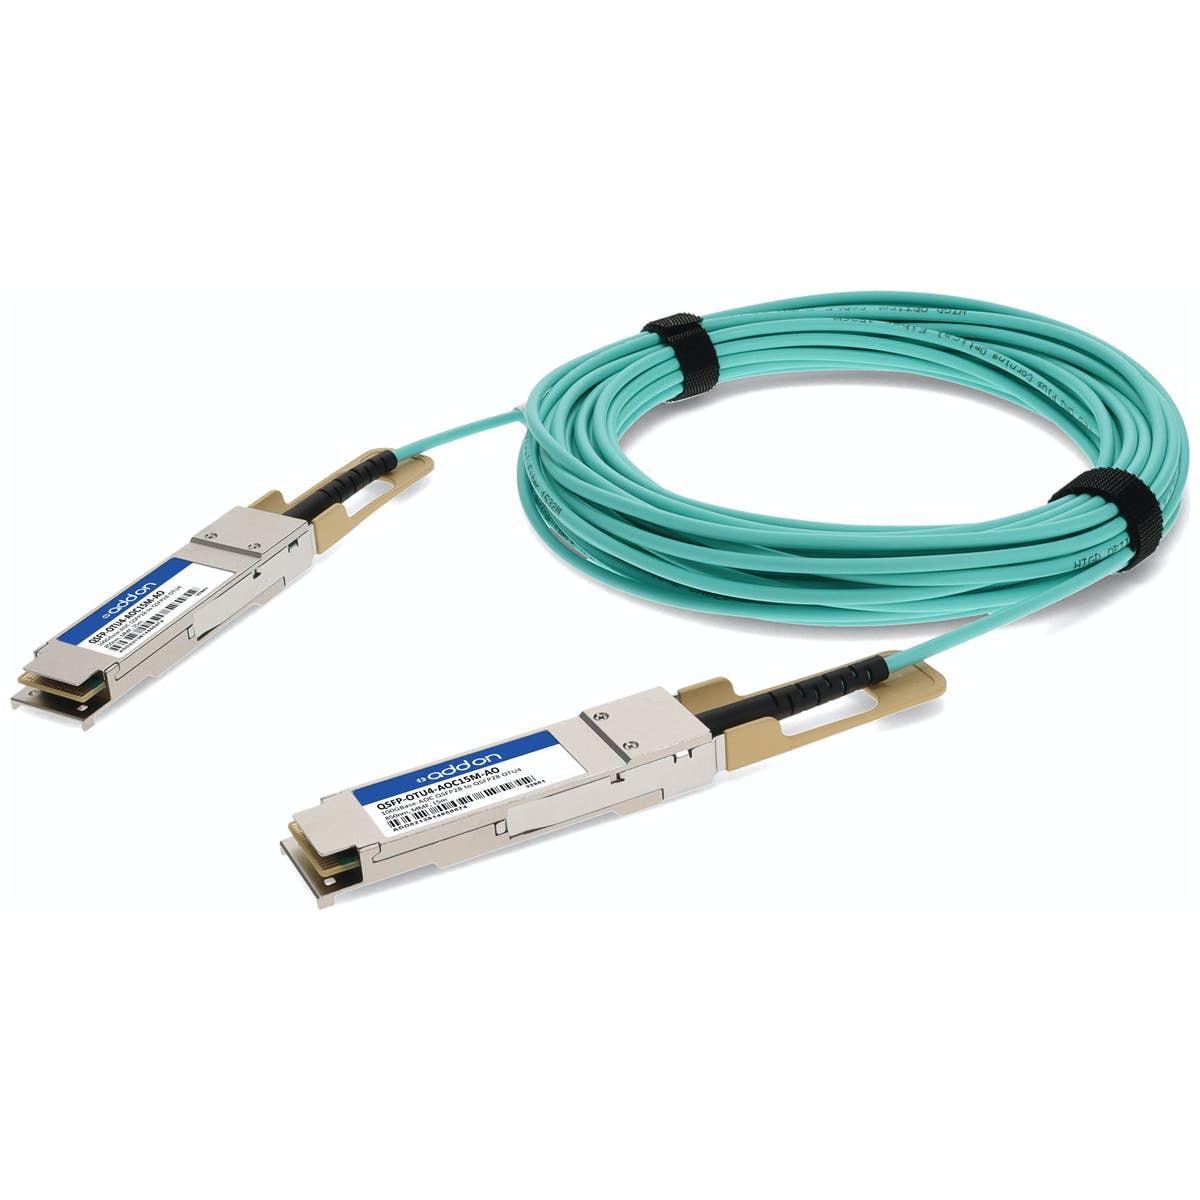 Addon Networks Qsfp-Otu4-Aoc7M-Ao Infiniband Cable 7 M Qsfp28 Turquoise